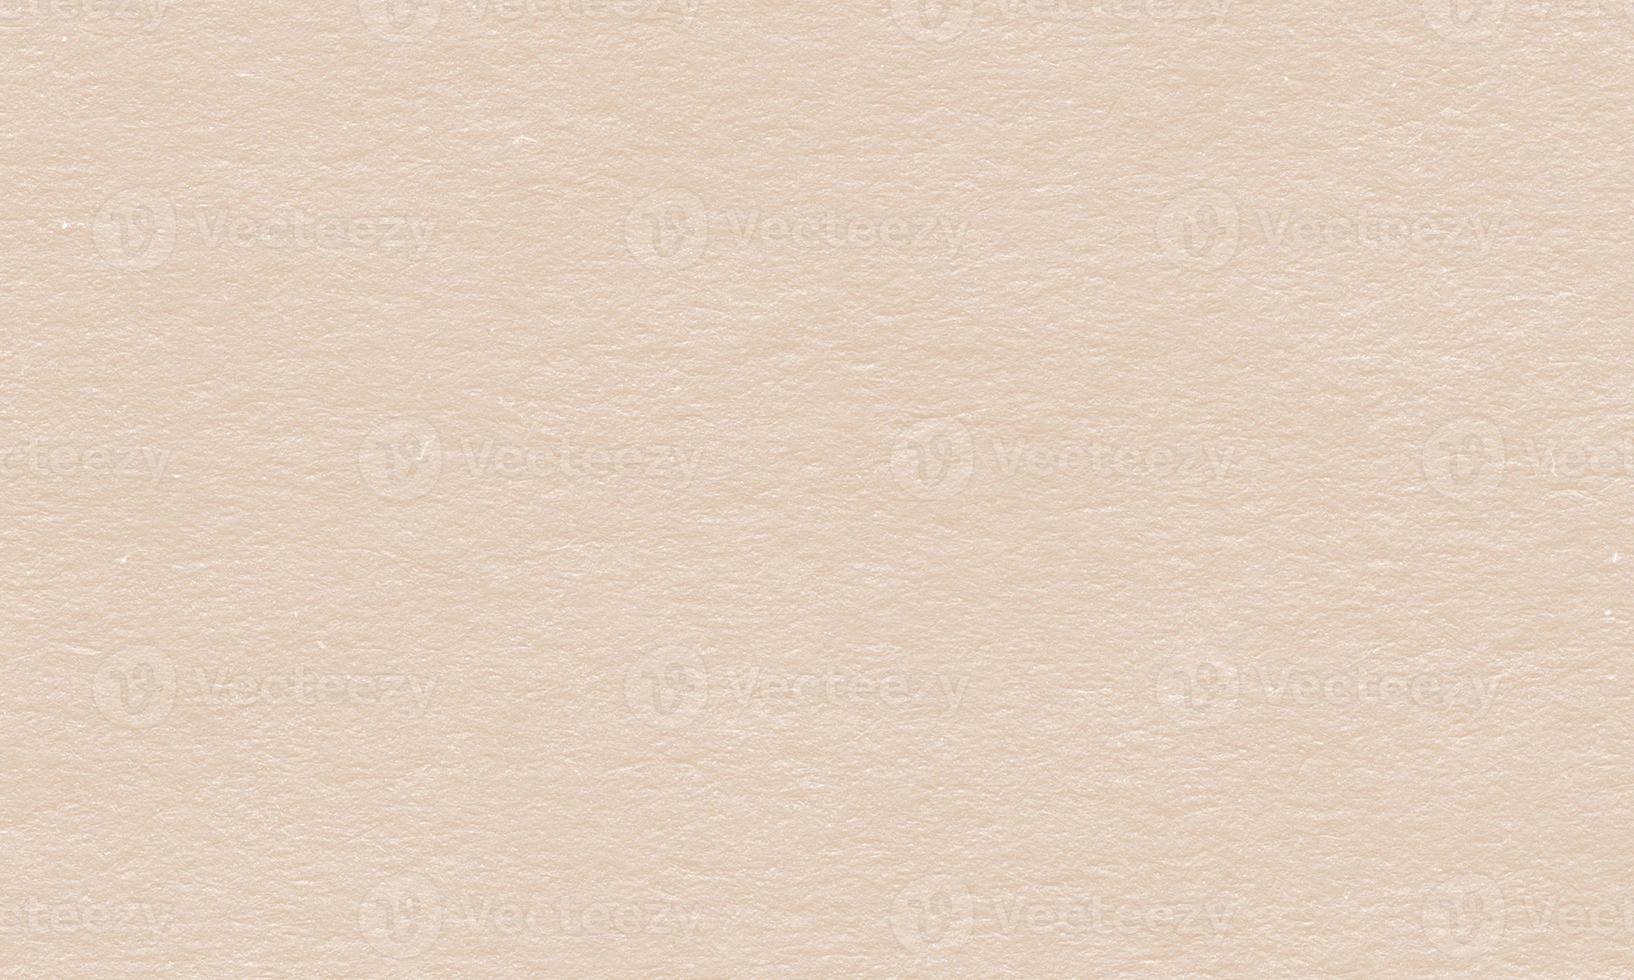 Blank white paper texture background. surface of white material for backdrop. photo